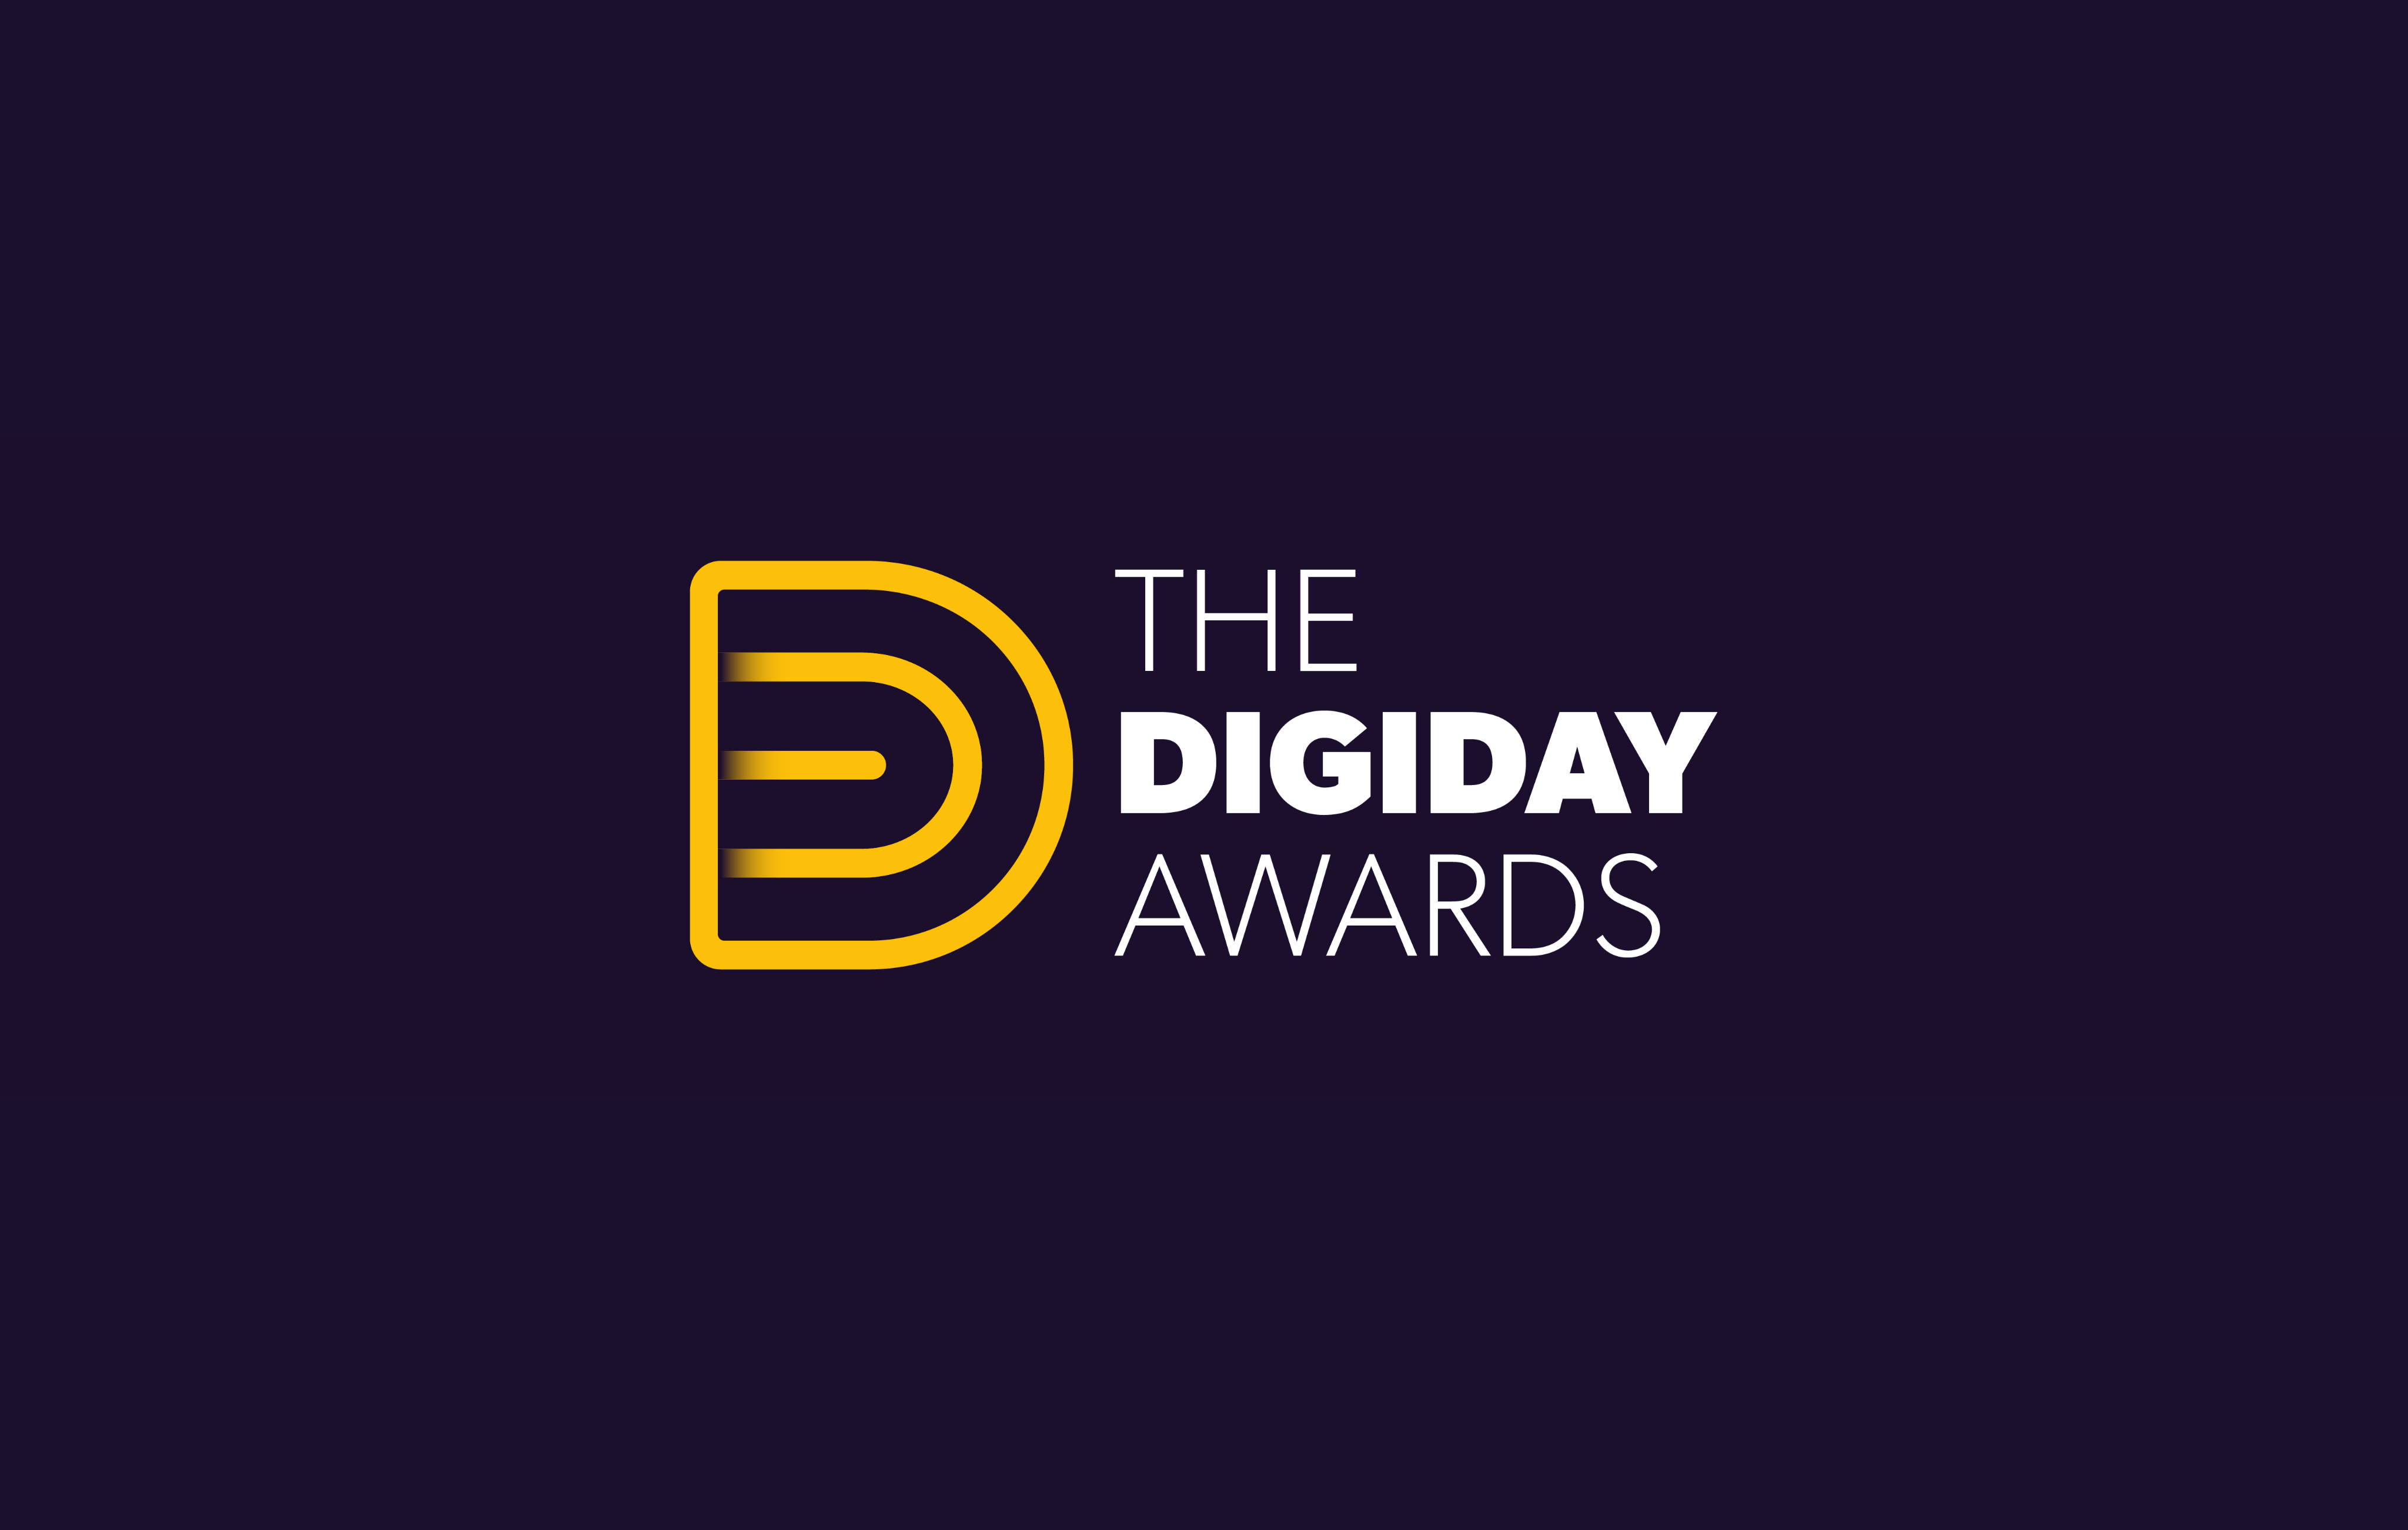 Teads, Edelman, VICE Media Group and Imagination are among this year’s Digiday Awards finalists - Digiday